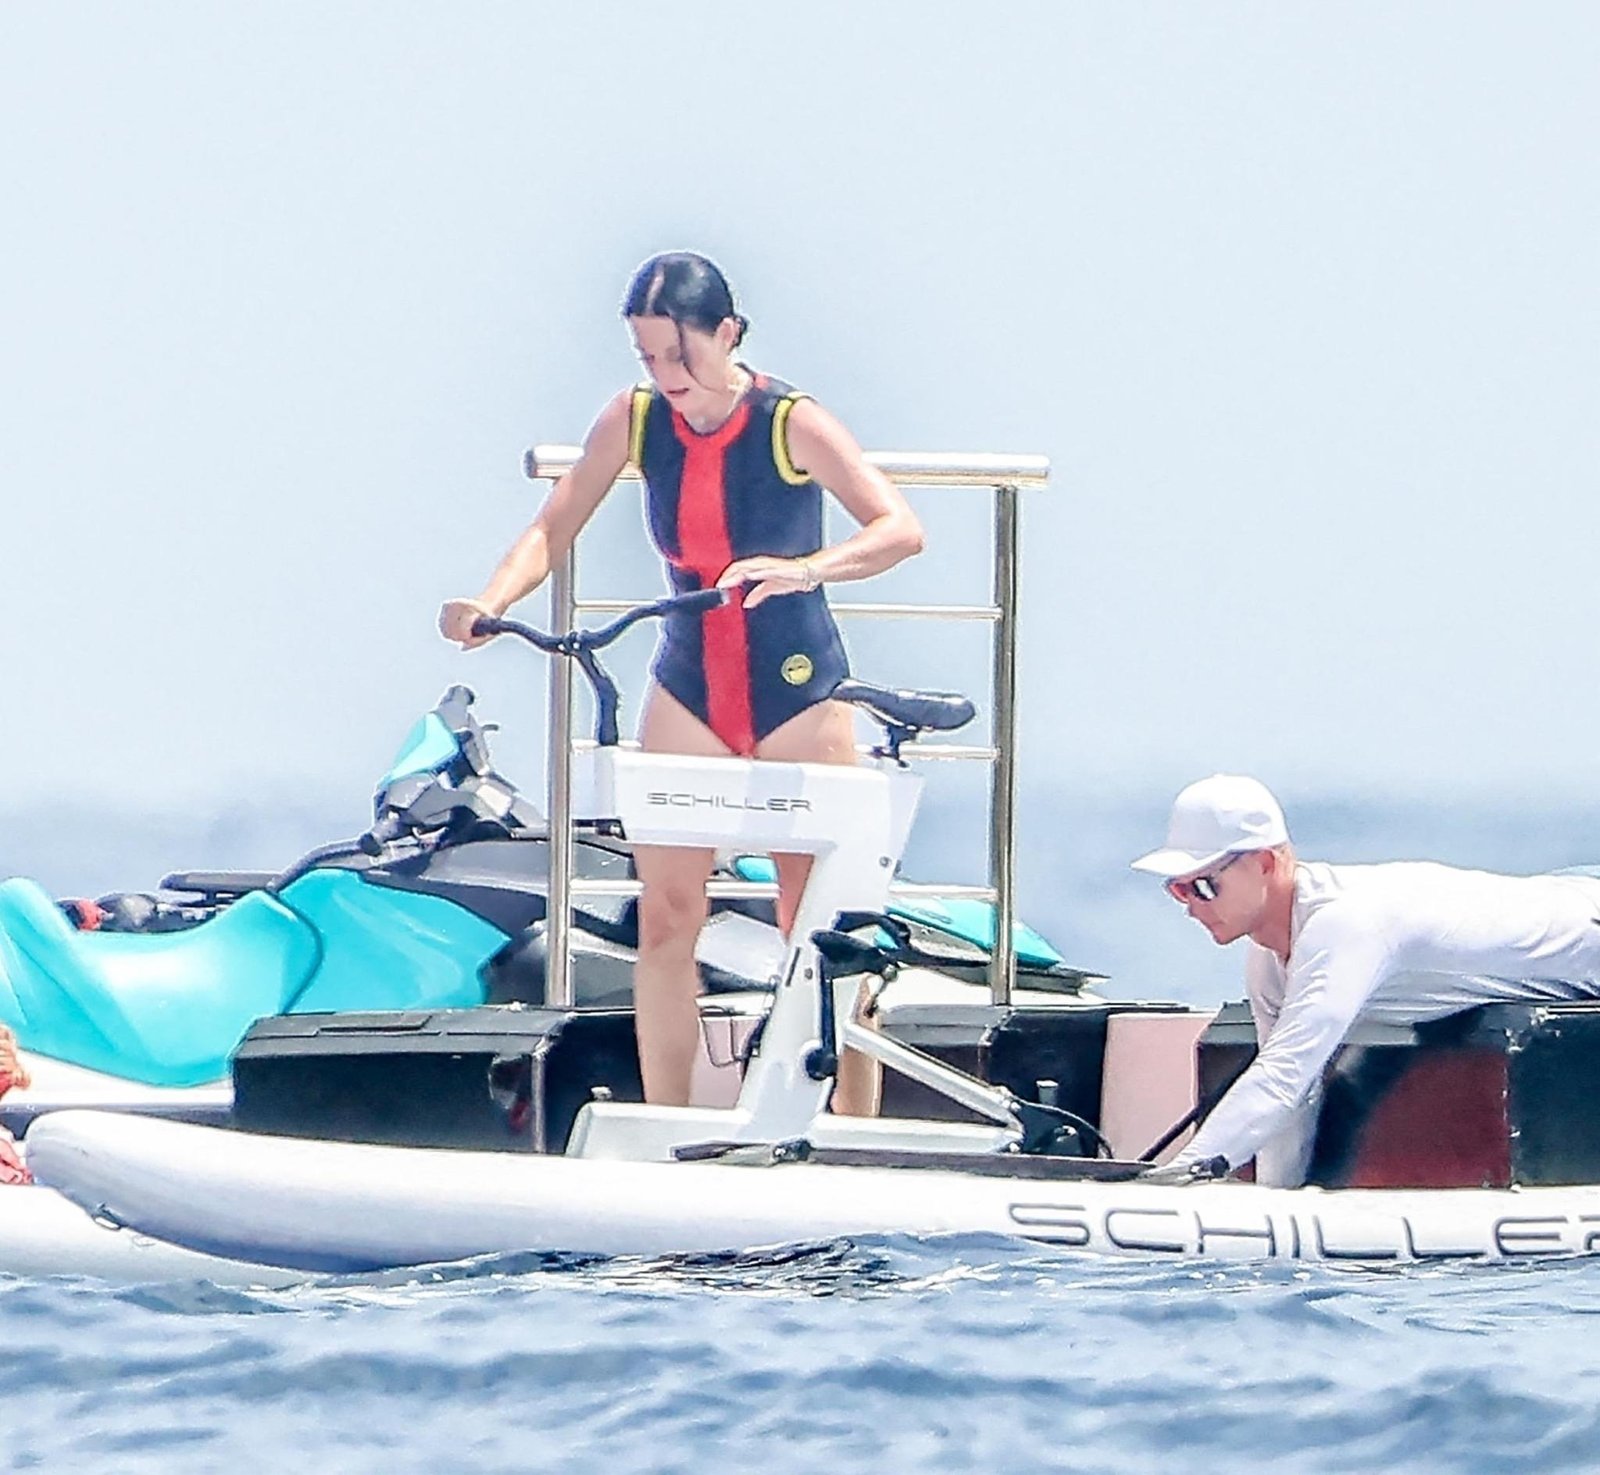 Katy Perry on a water bike